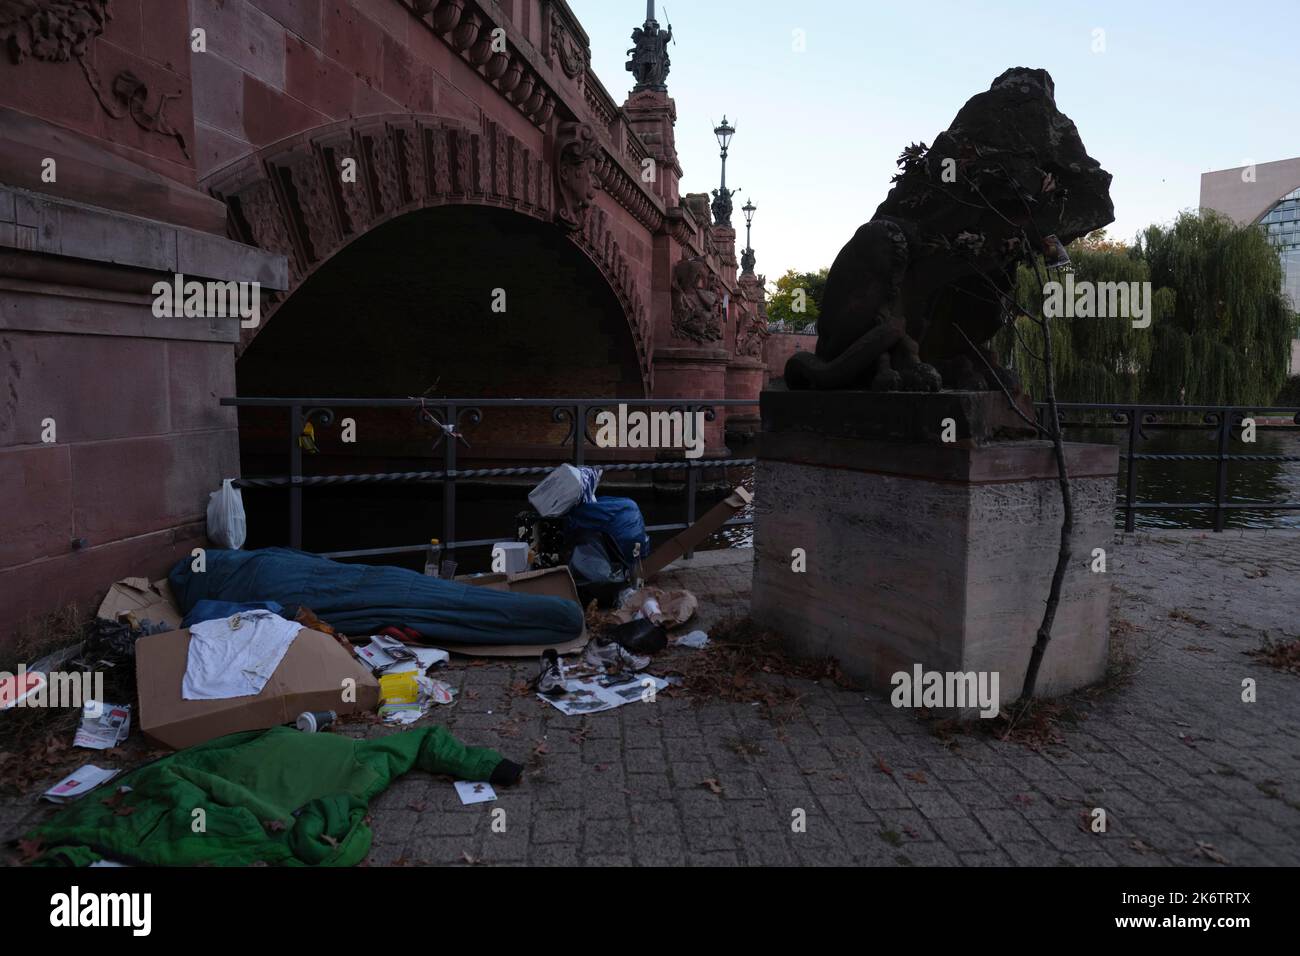 Germany, Berlin, 09. 10. 201, homeless man sleeping in a sleeping bag surrounded by rubbish, at the Moltkebruecke, Spree, in the background the Stock Photo